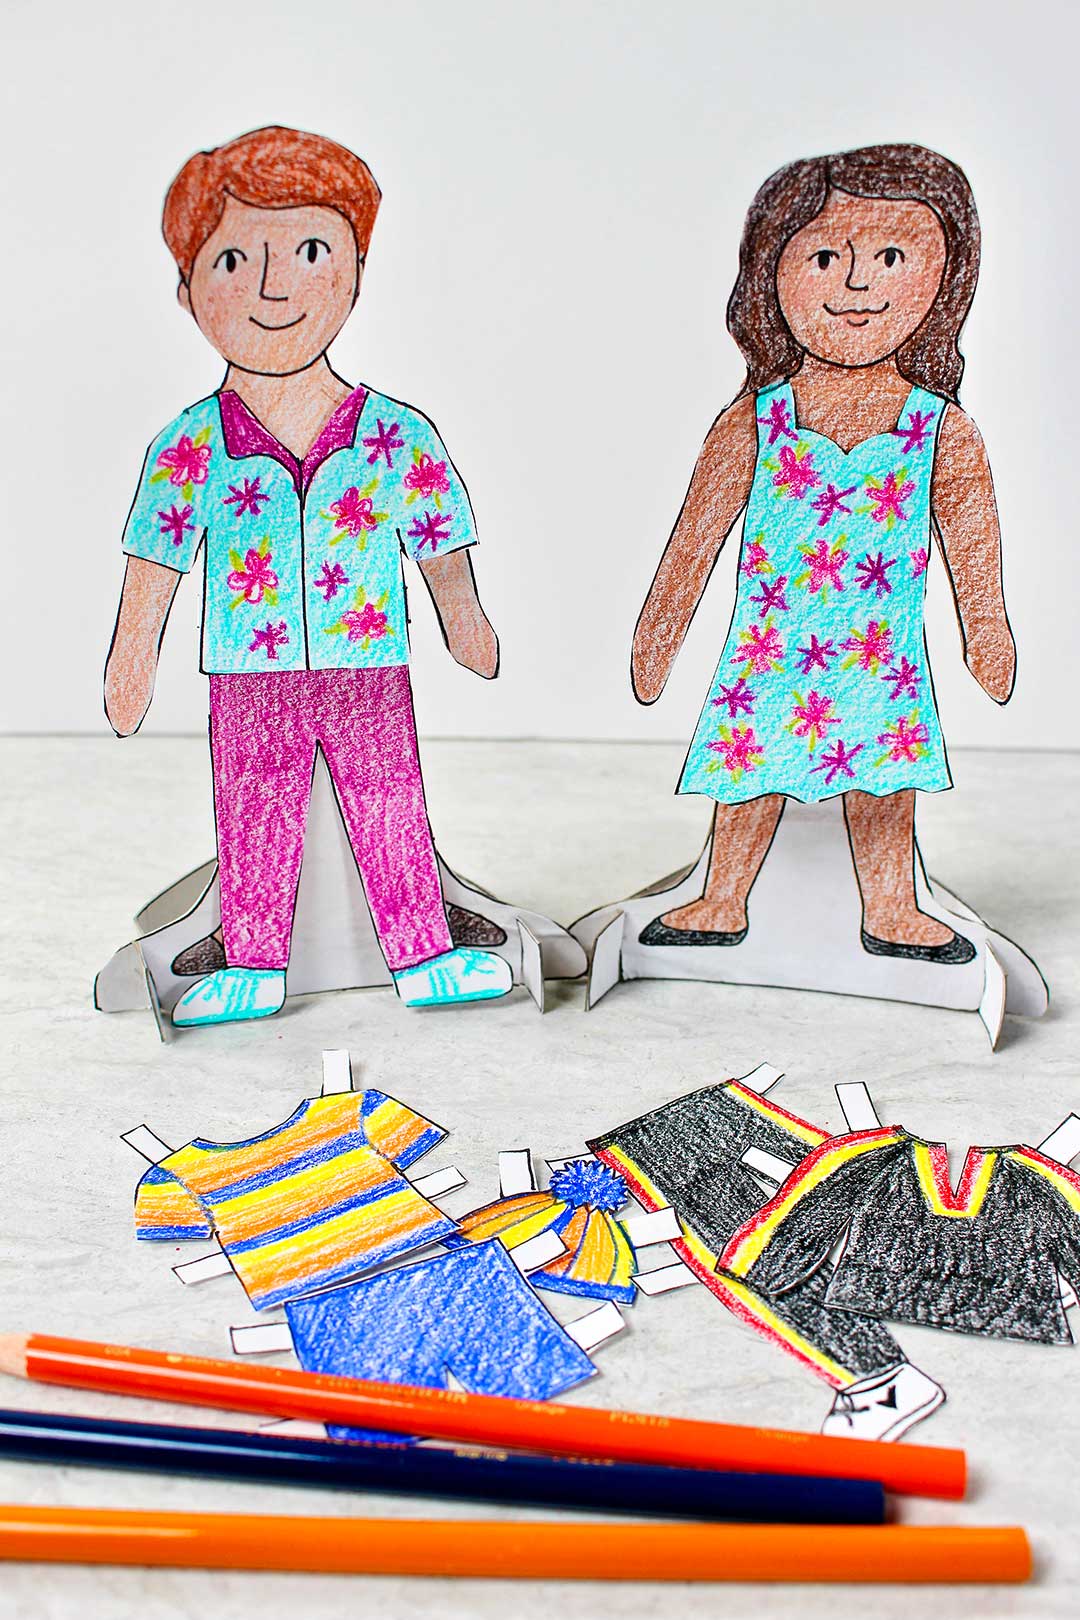 Paper Doll Printables - Reading adventures for kids ages 3 to 5